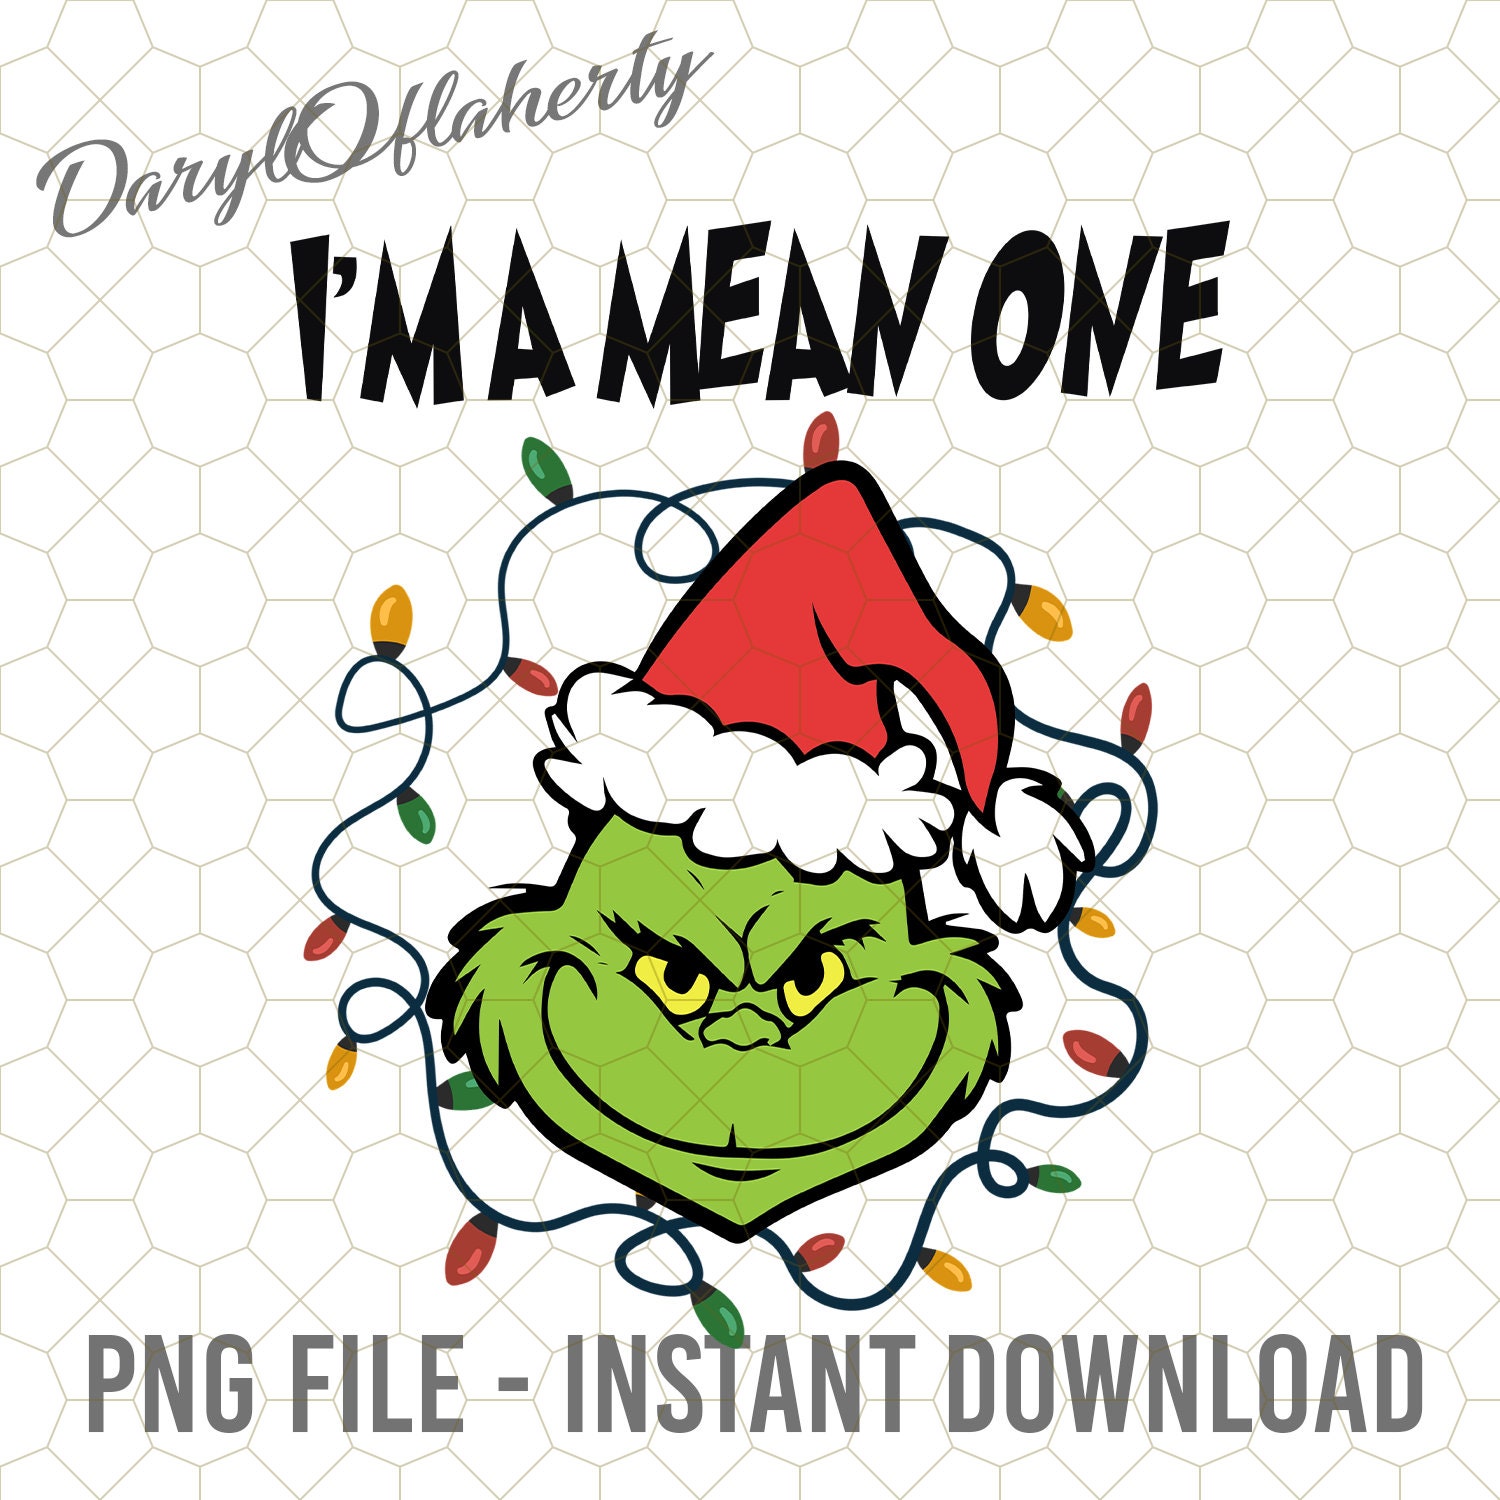 Grinchy And Bougie SVG, Grinch With Stanley Cup SVG, Trendy Grinch